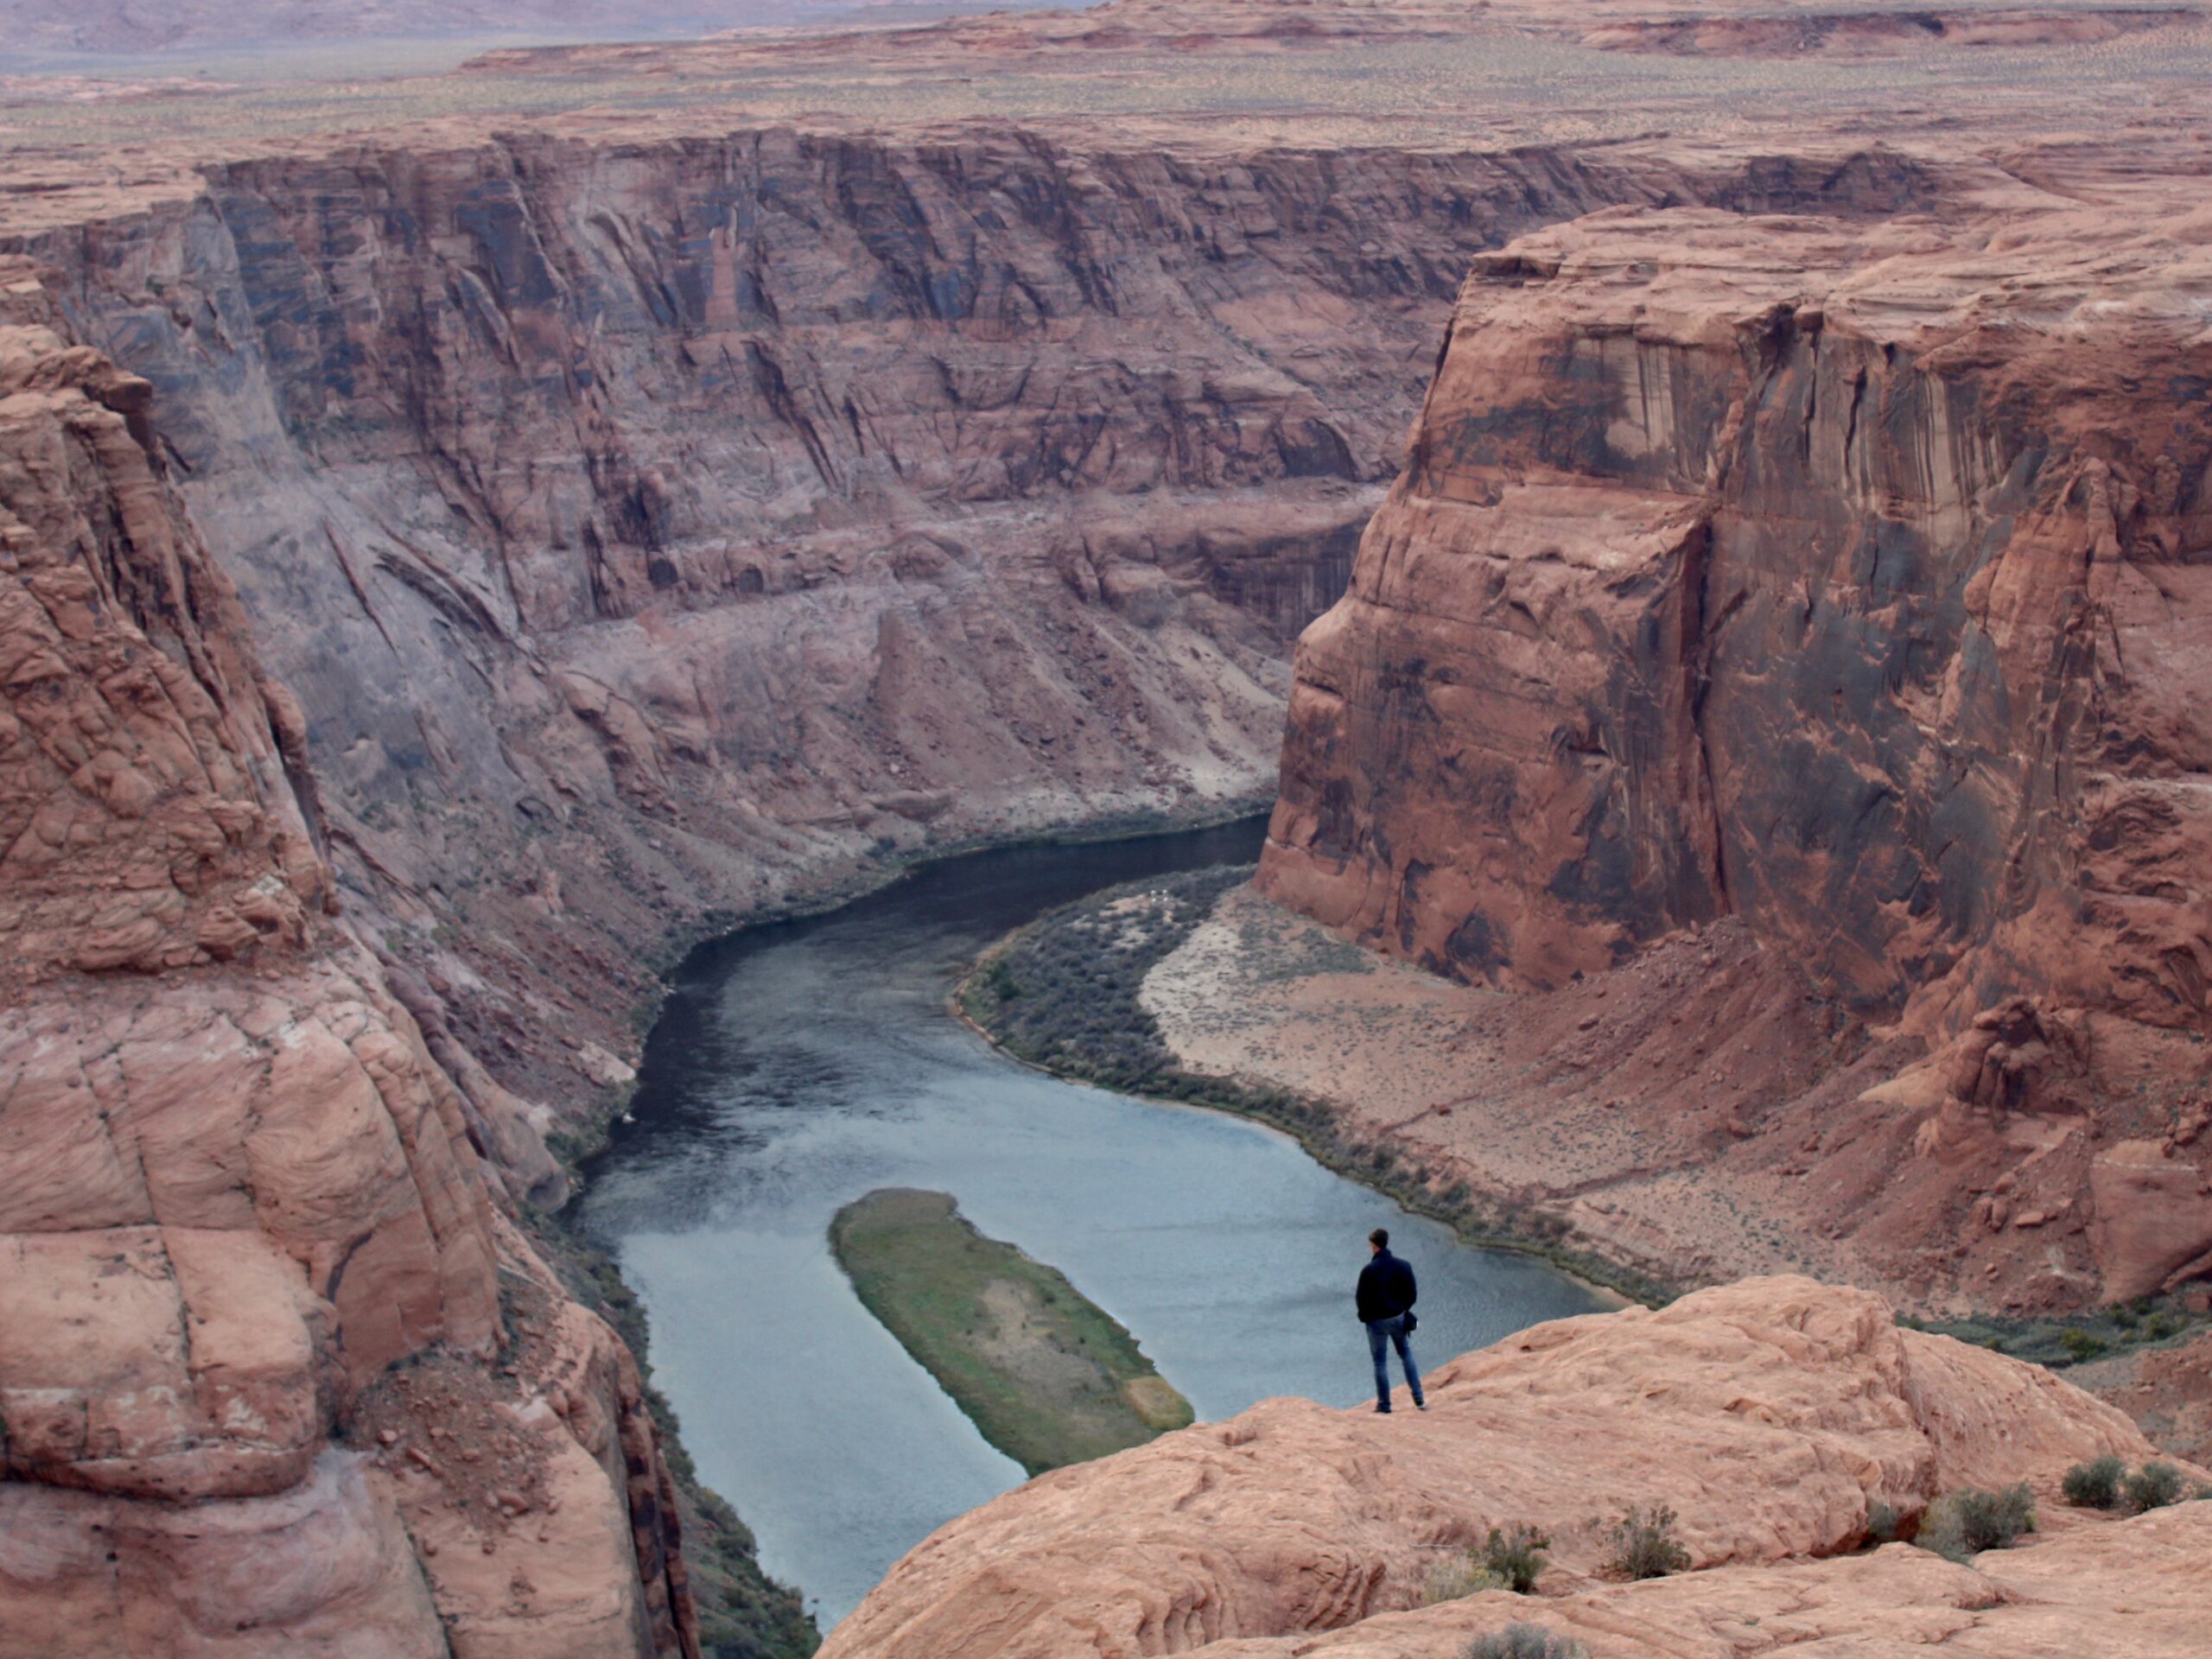 As a deadline approaches, Colorado River states are still far apart on water sharing